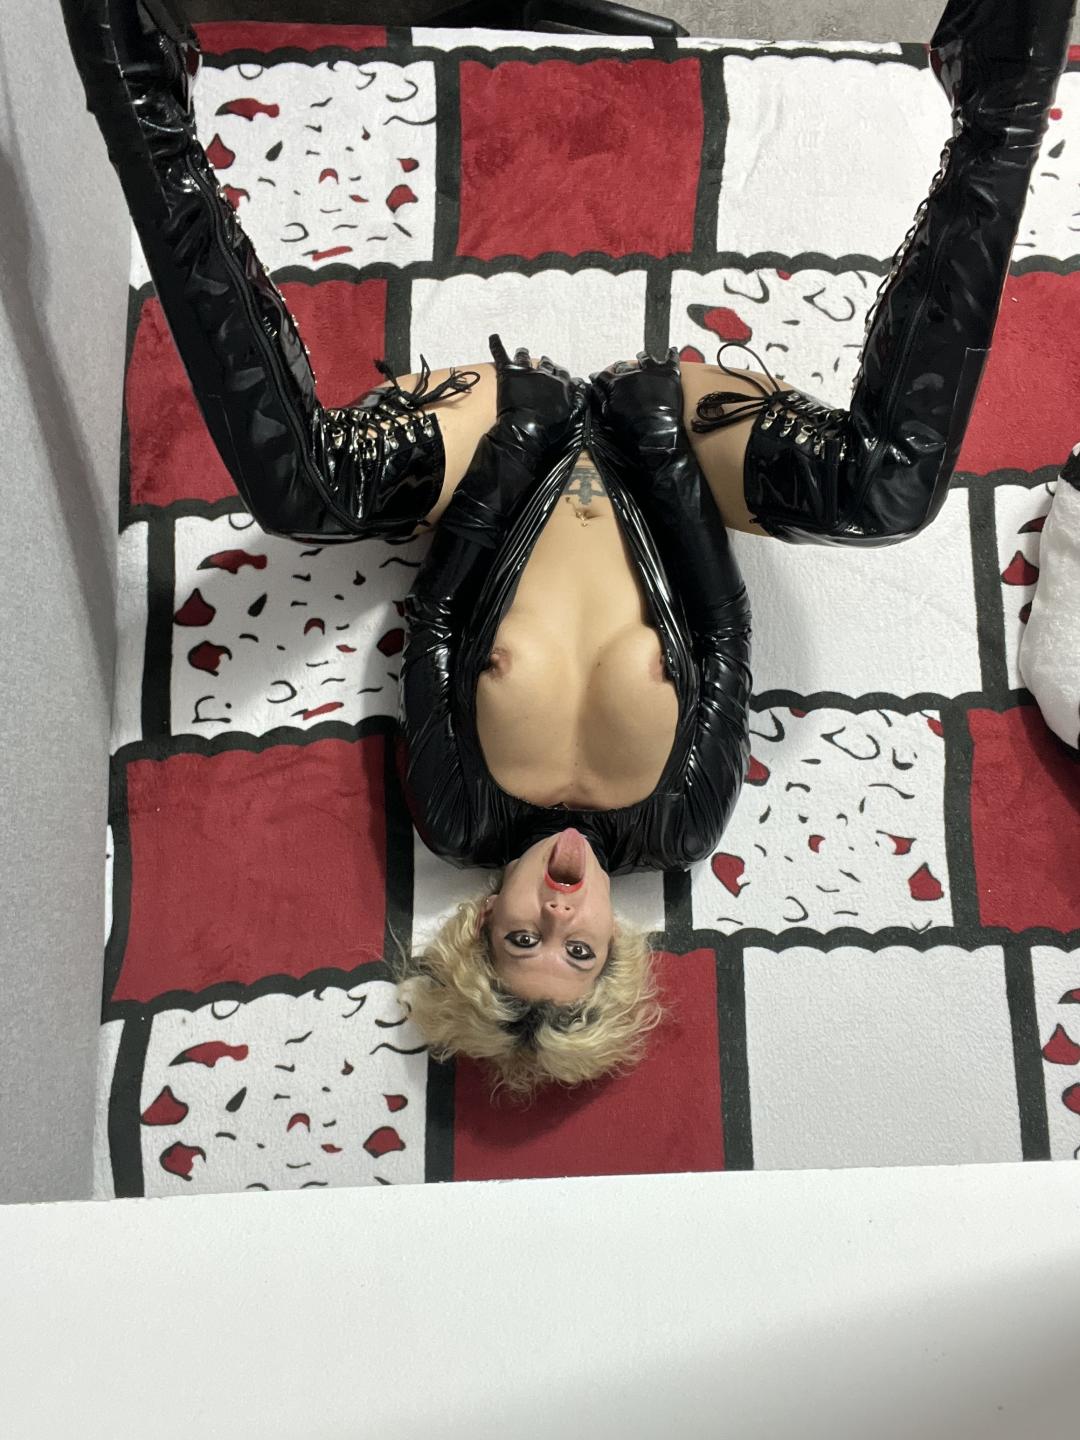 Tall blonde milf dominatrix is a ruthless master into femdom and has a huge BBC dildo attached to peg her obedient male slaves. Wears black latex suits and leather boots and loves to train her slaves. Has a whip and often ties it on her mature ass first while having a gag ball in her mouth drooling